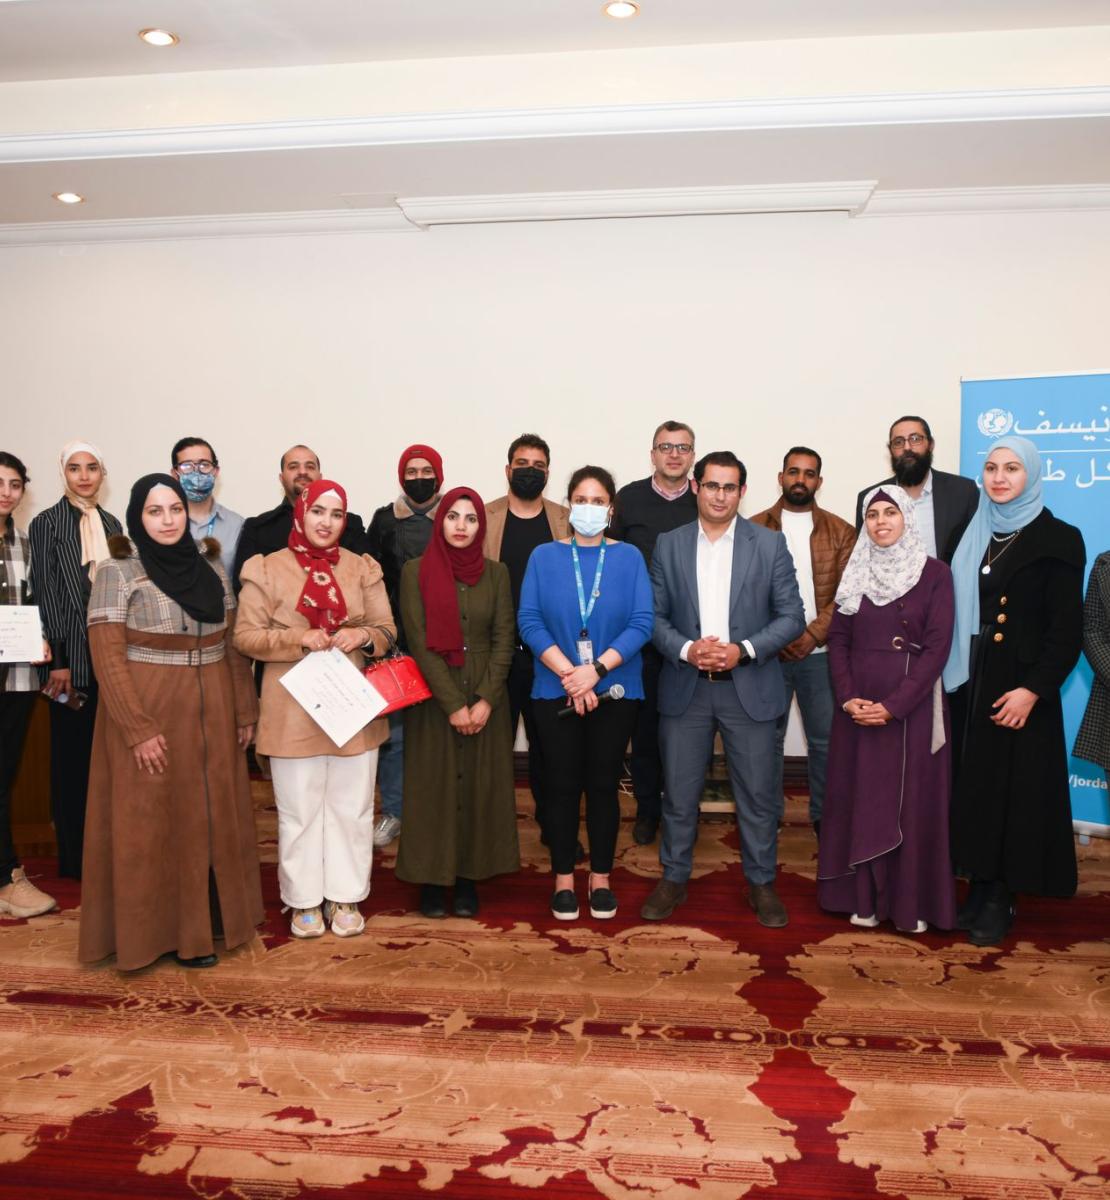 Participants in the WFP/ UNICEF Youth in Food Security Innovation event, Amman, Jordan.